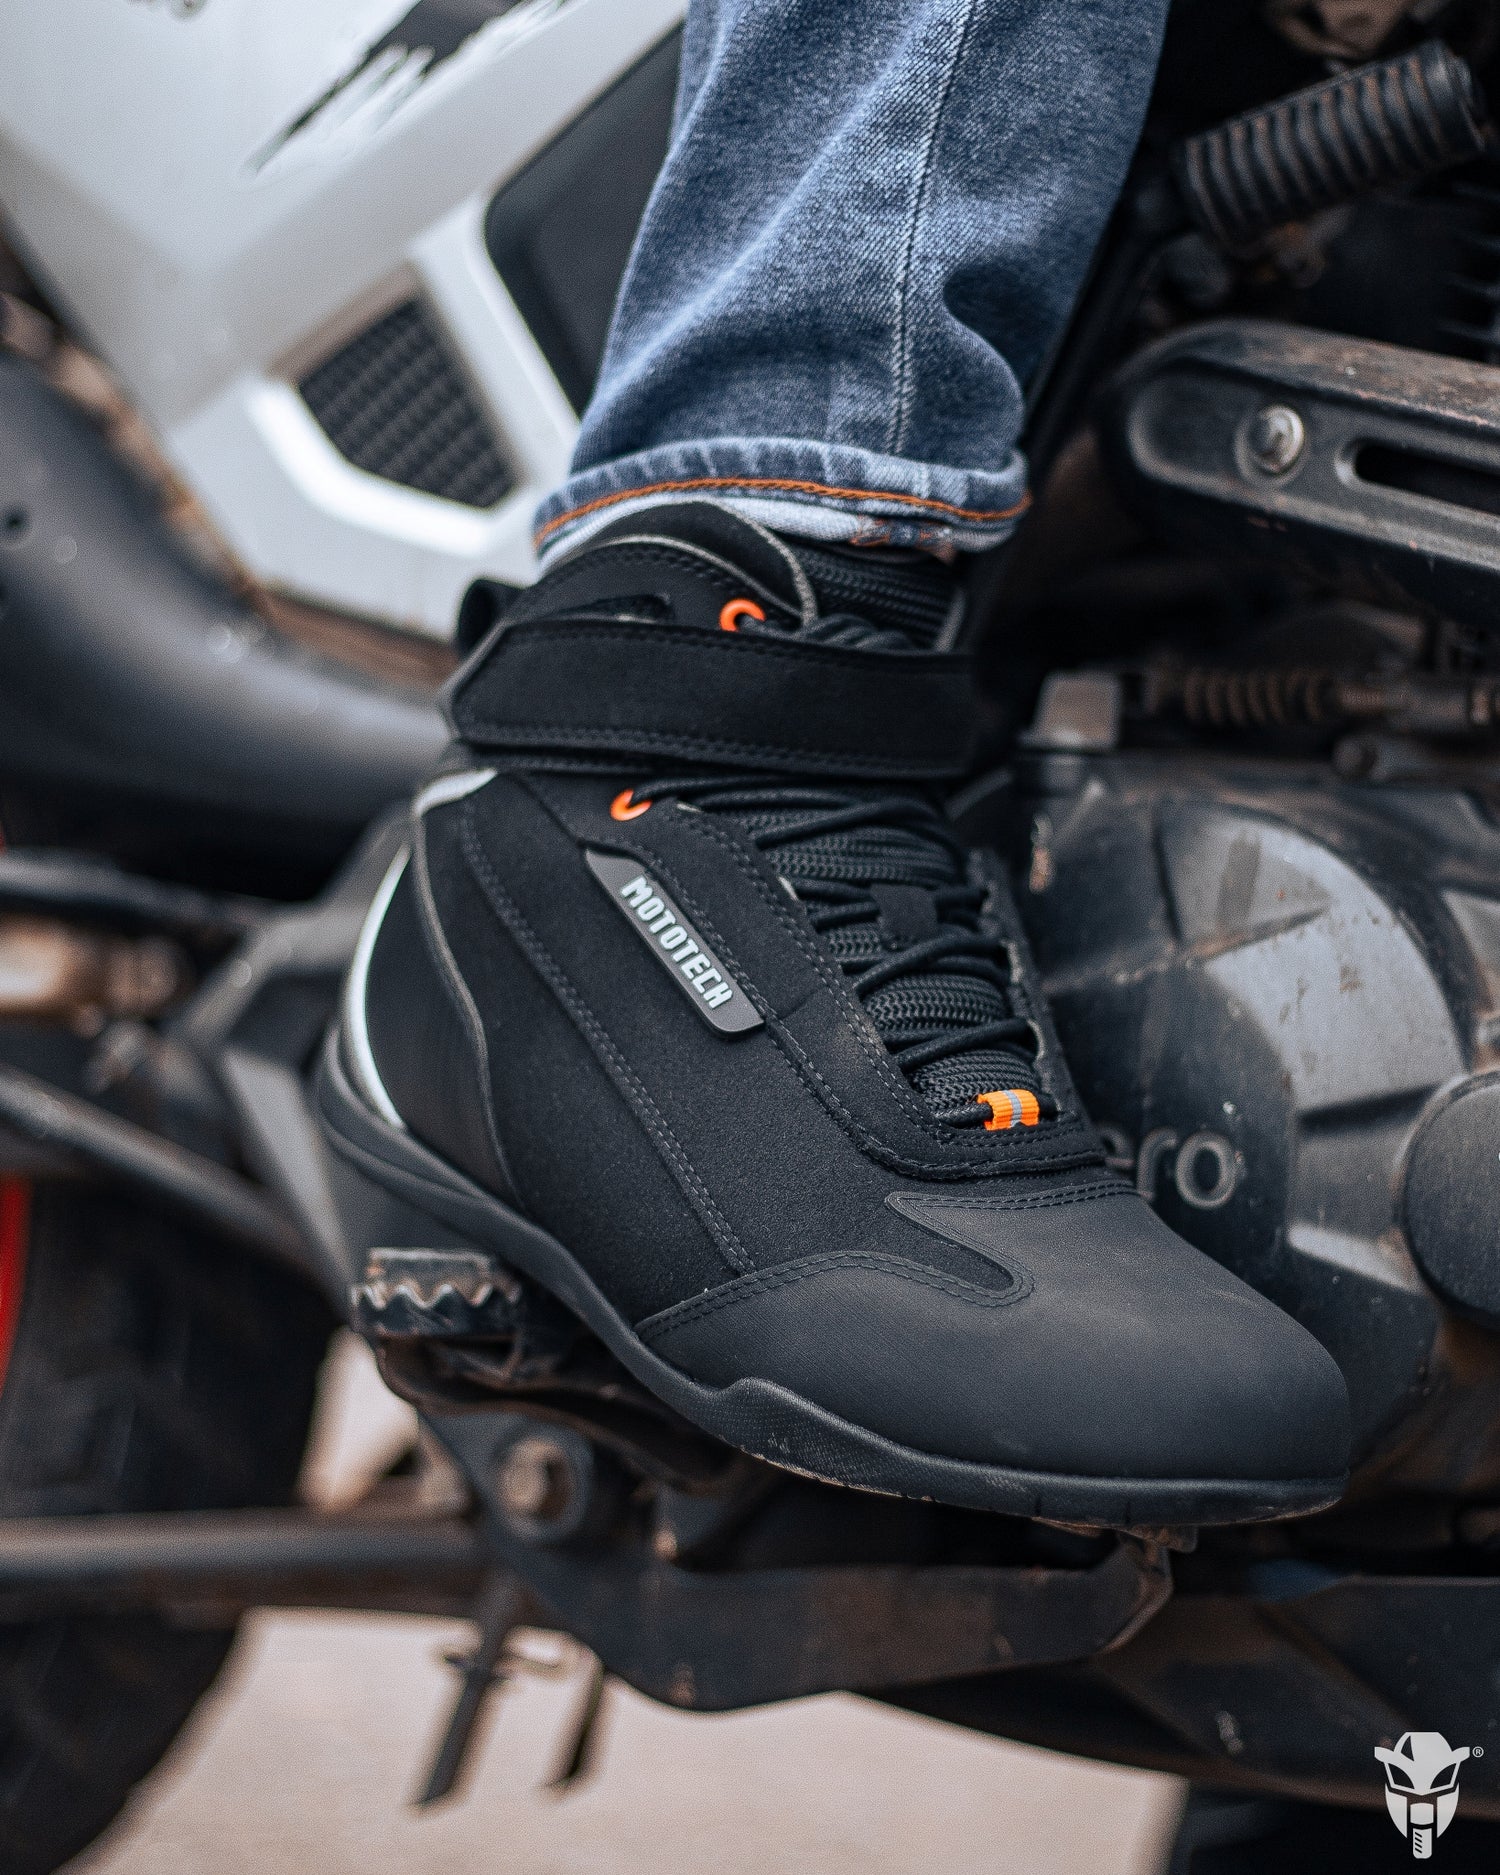 Protective Motorcycle Riding Gloves and Boots